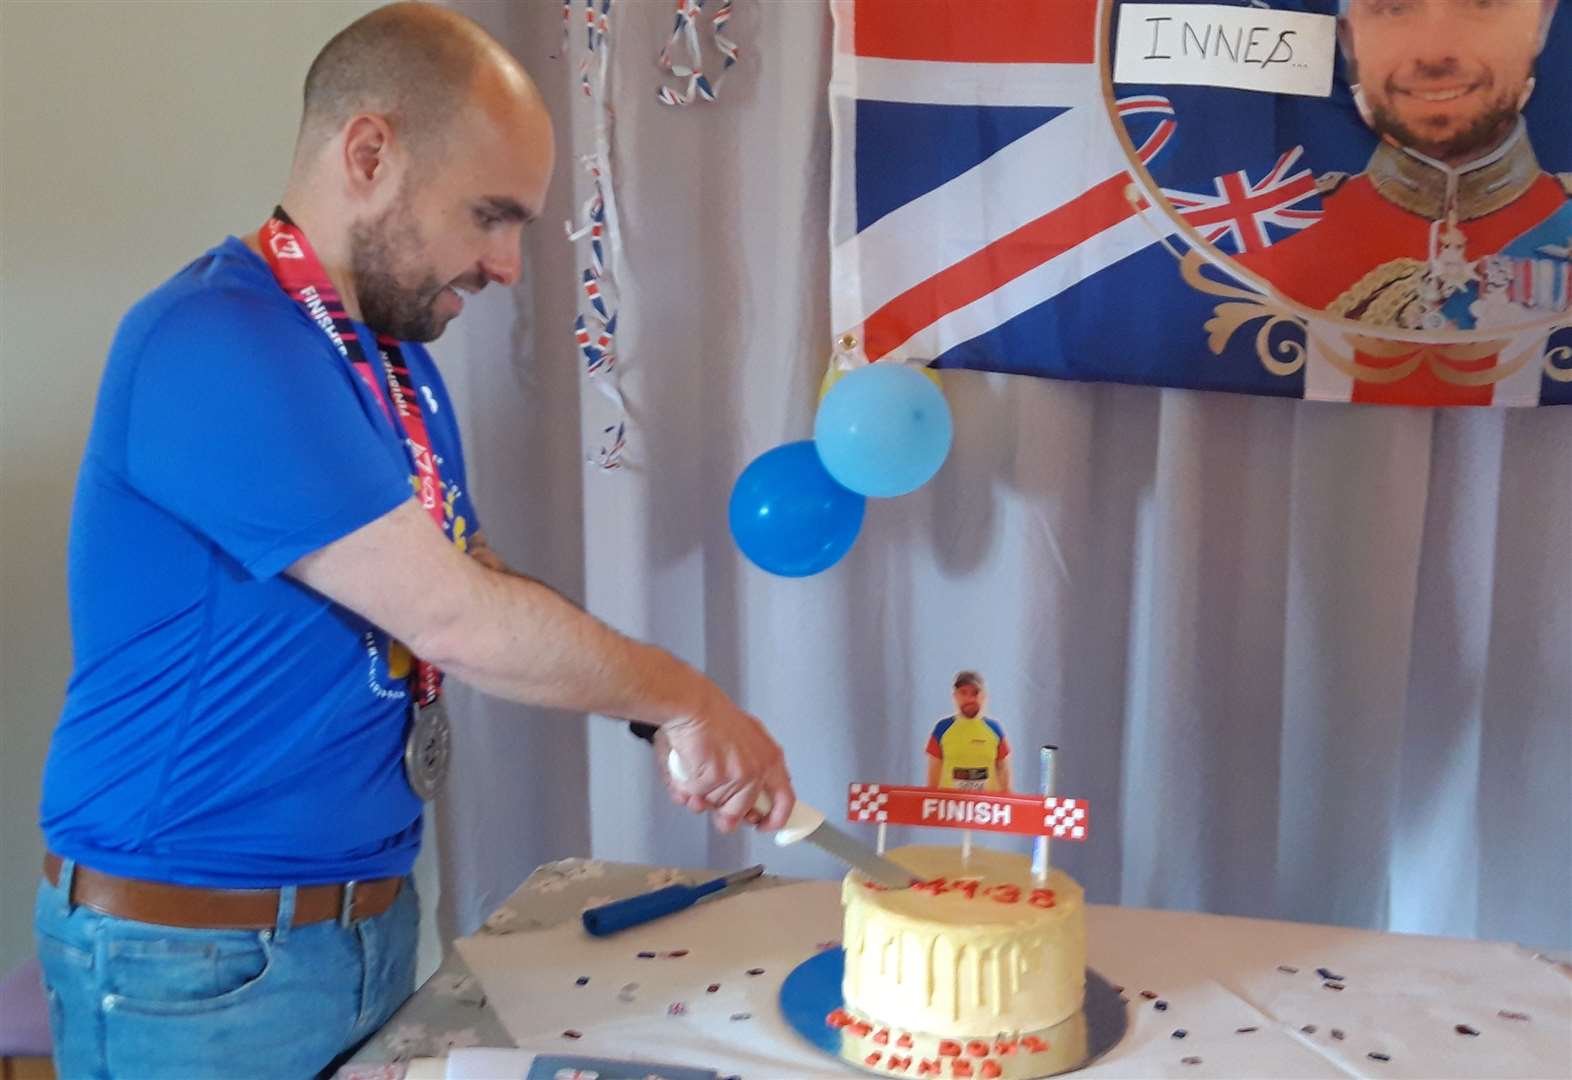 London Marathon runner who raised £3.2k for Brora Hub takes centre stage at party in his honour